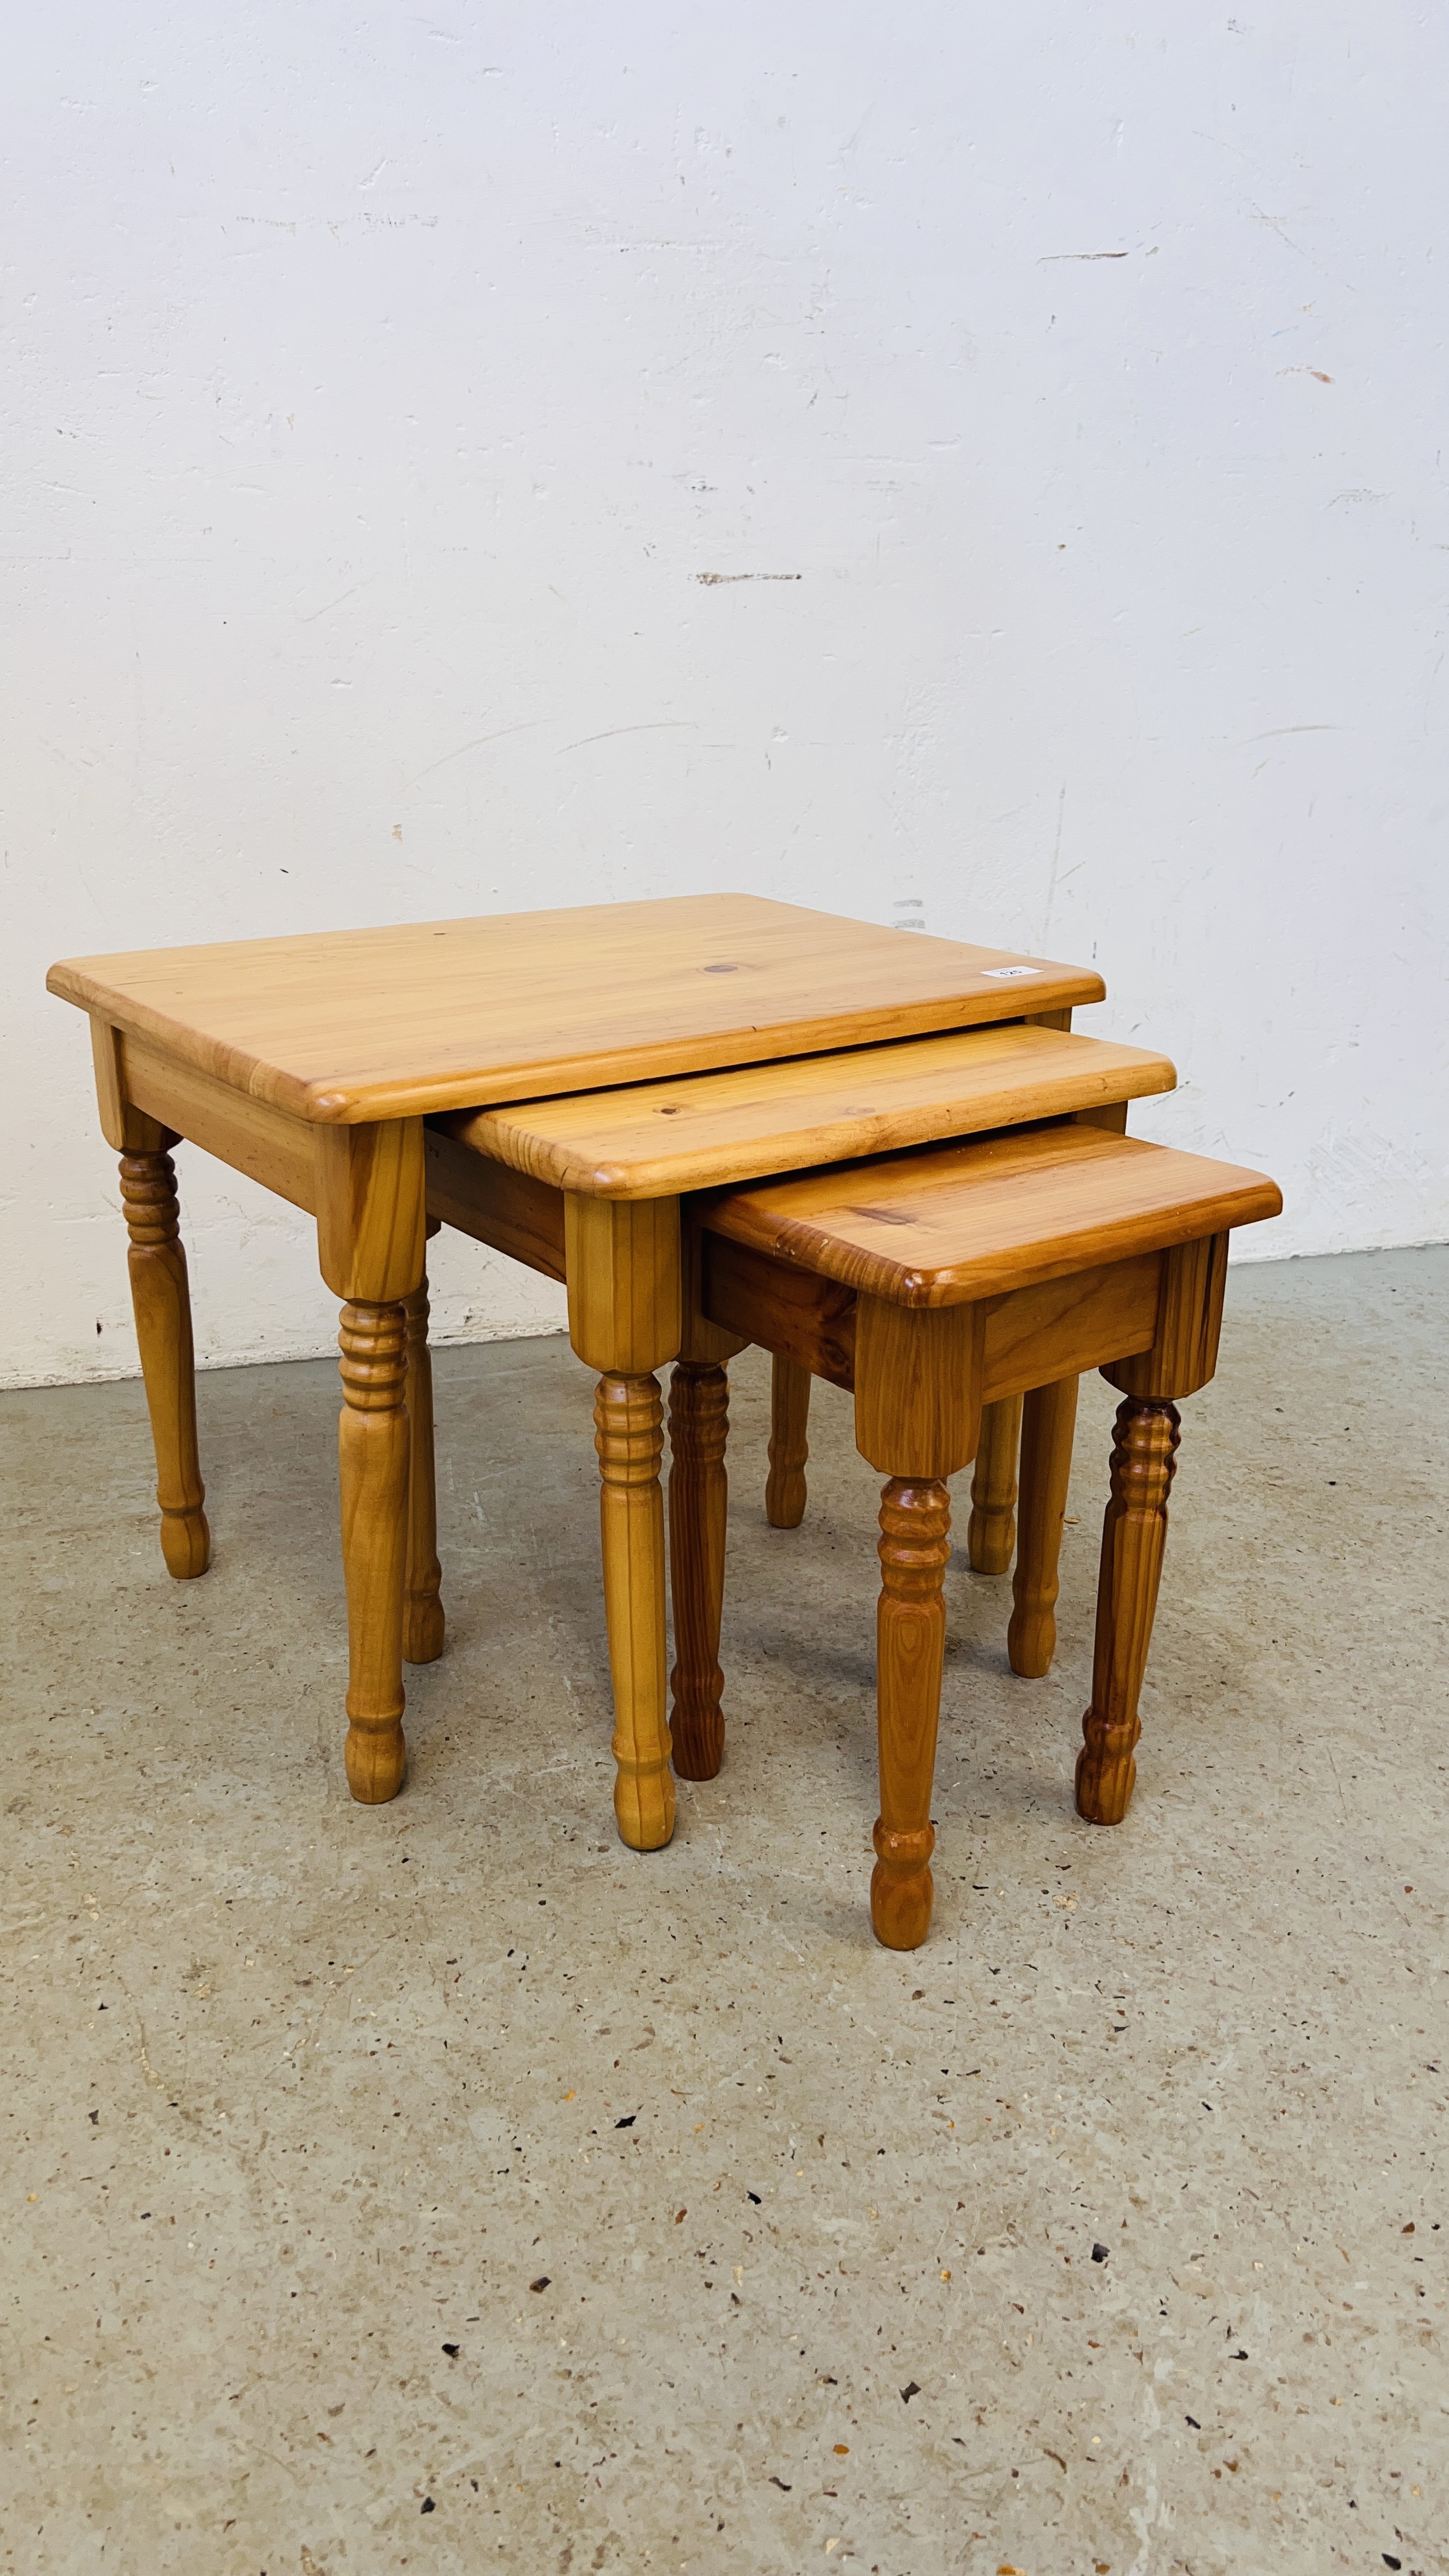 NEST OF THREE GRADUATED PINE TABLES. - Image 6 of 7